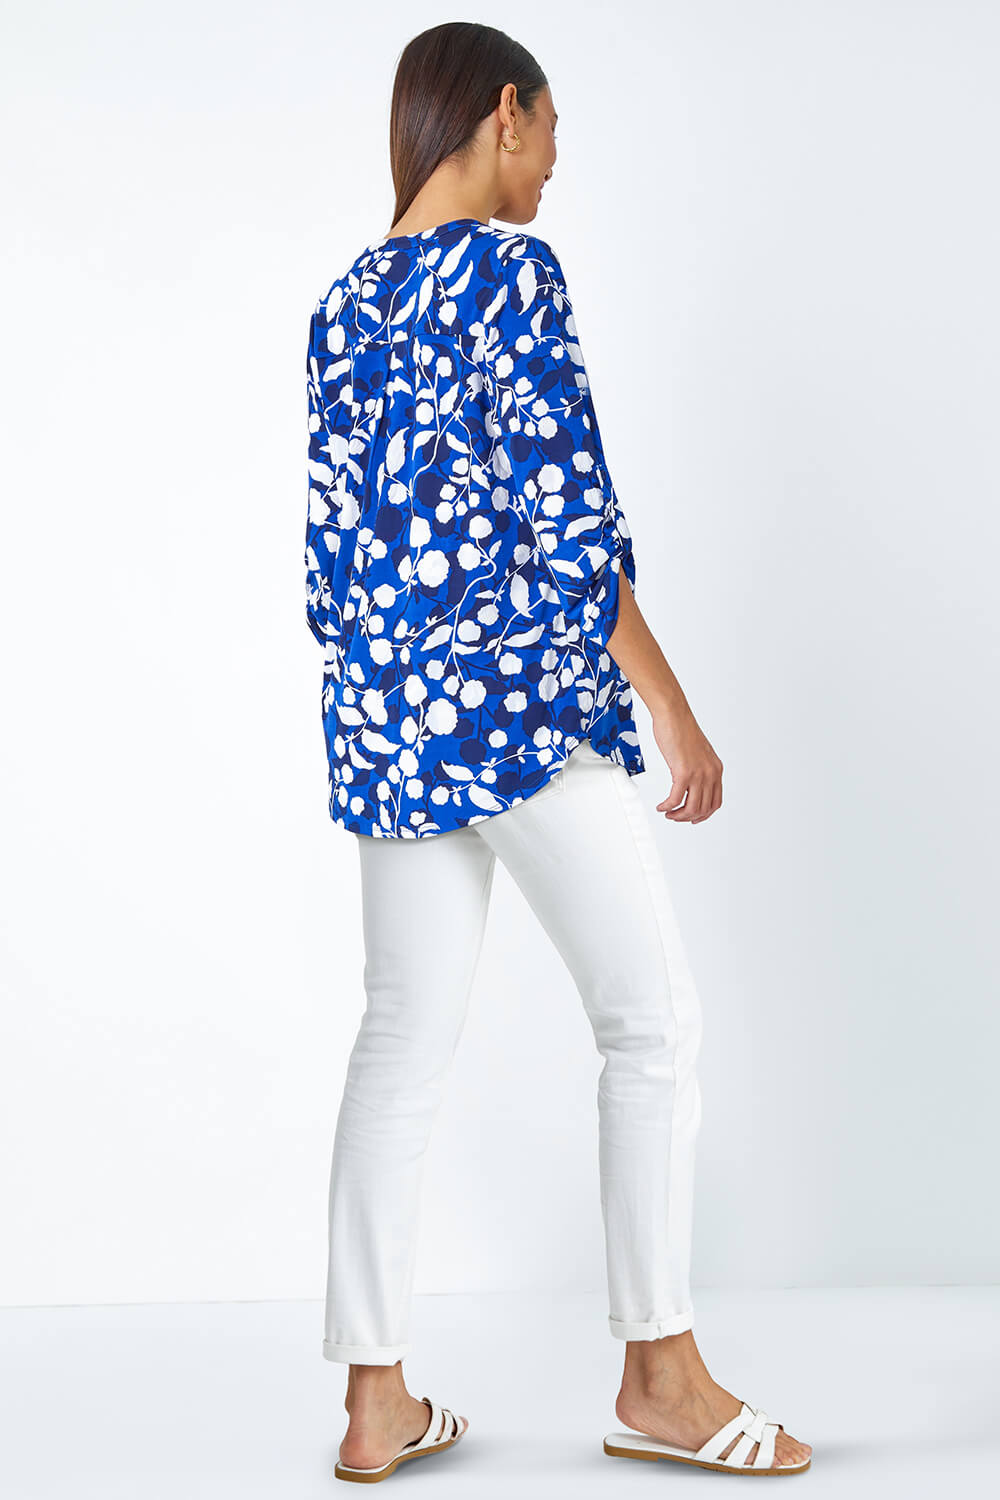 Royal Blue Textured Floral Print Stretch Shirt, Image 3 of 5